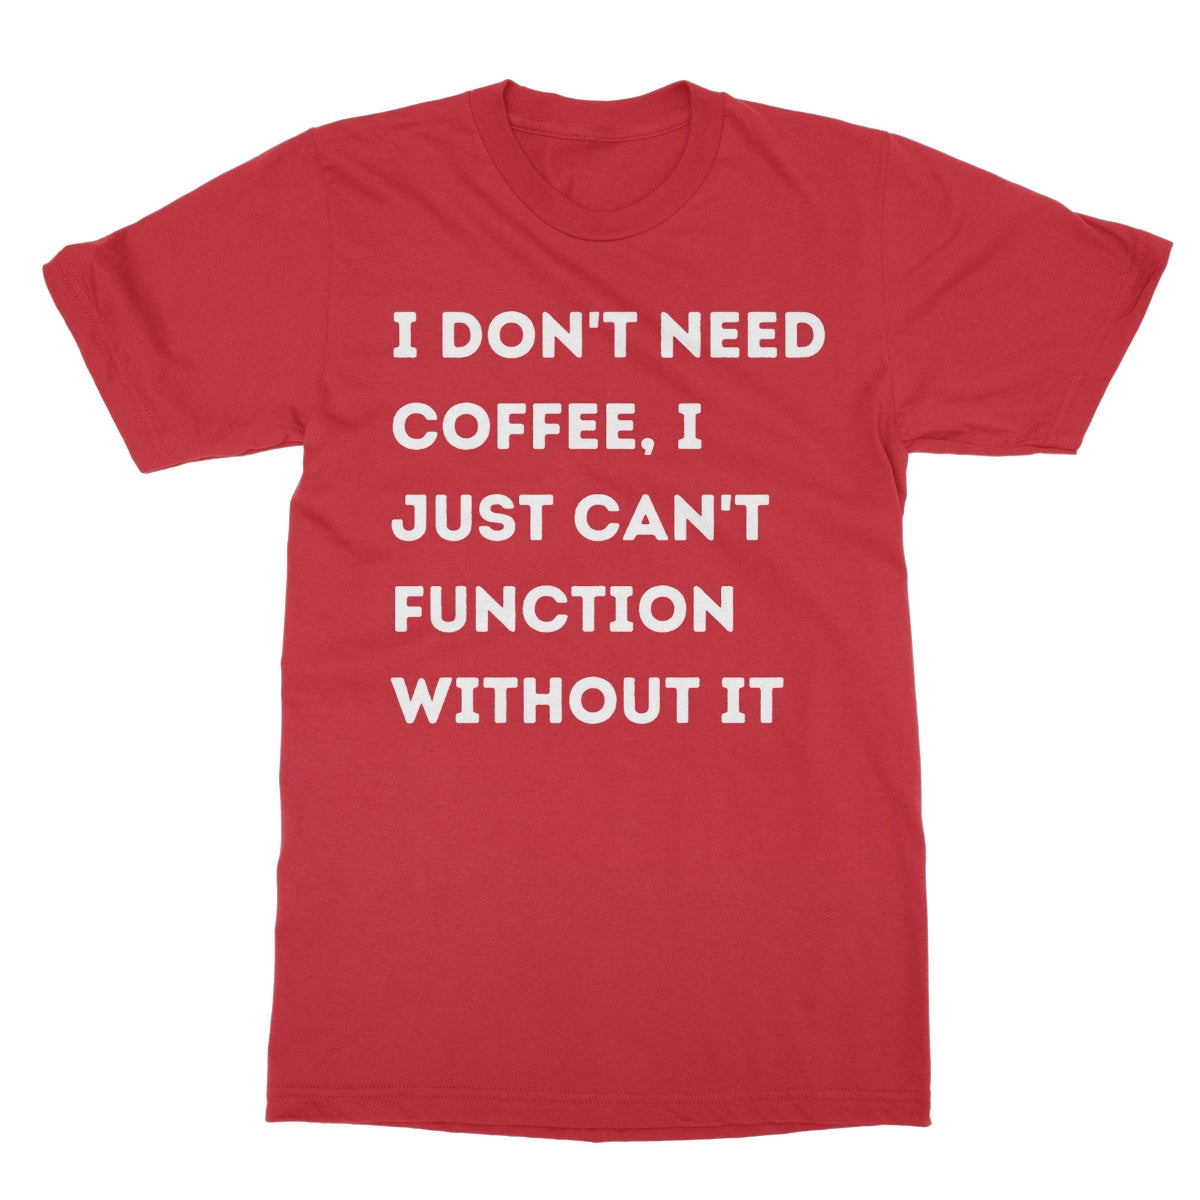 I can't function without coffee t shirt red